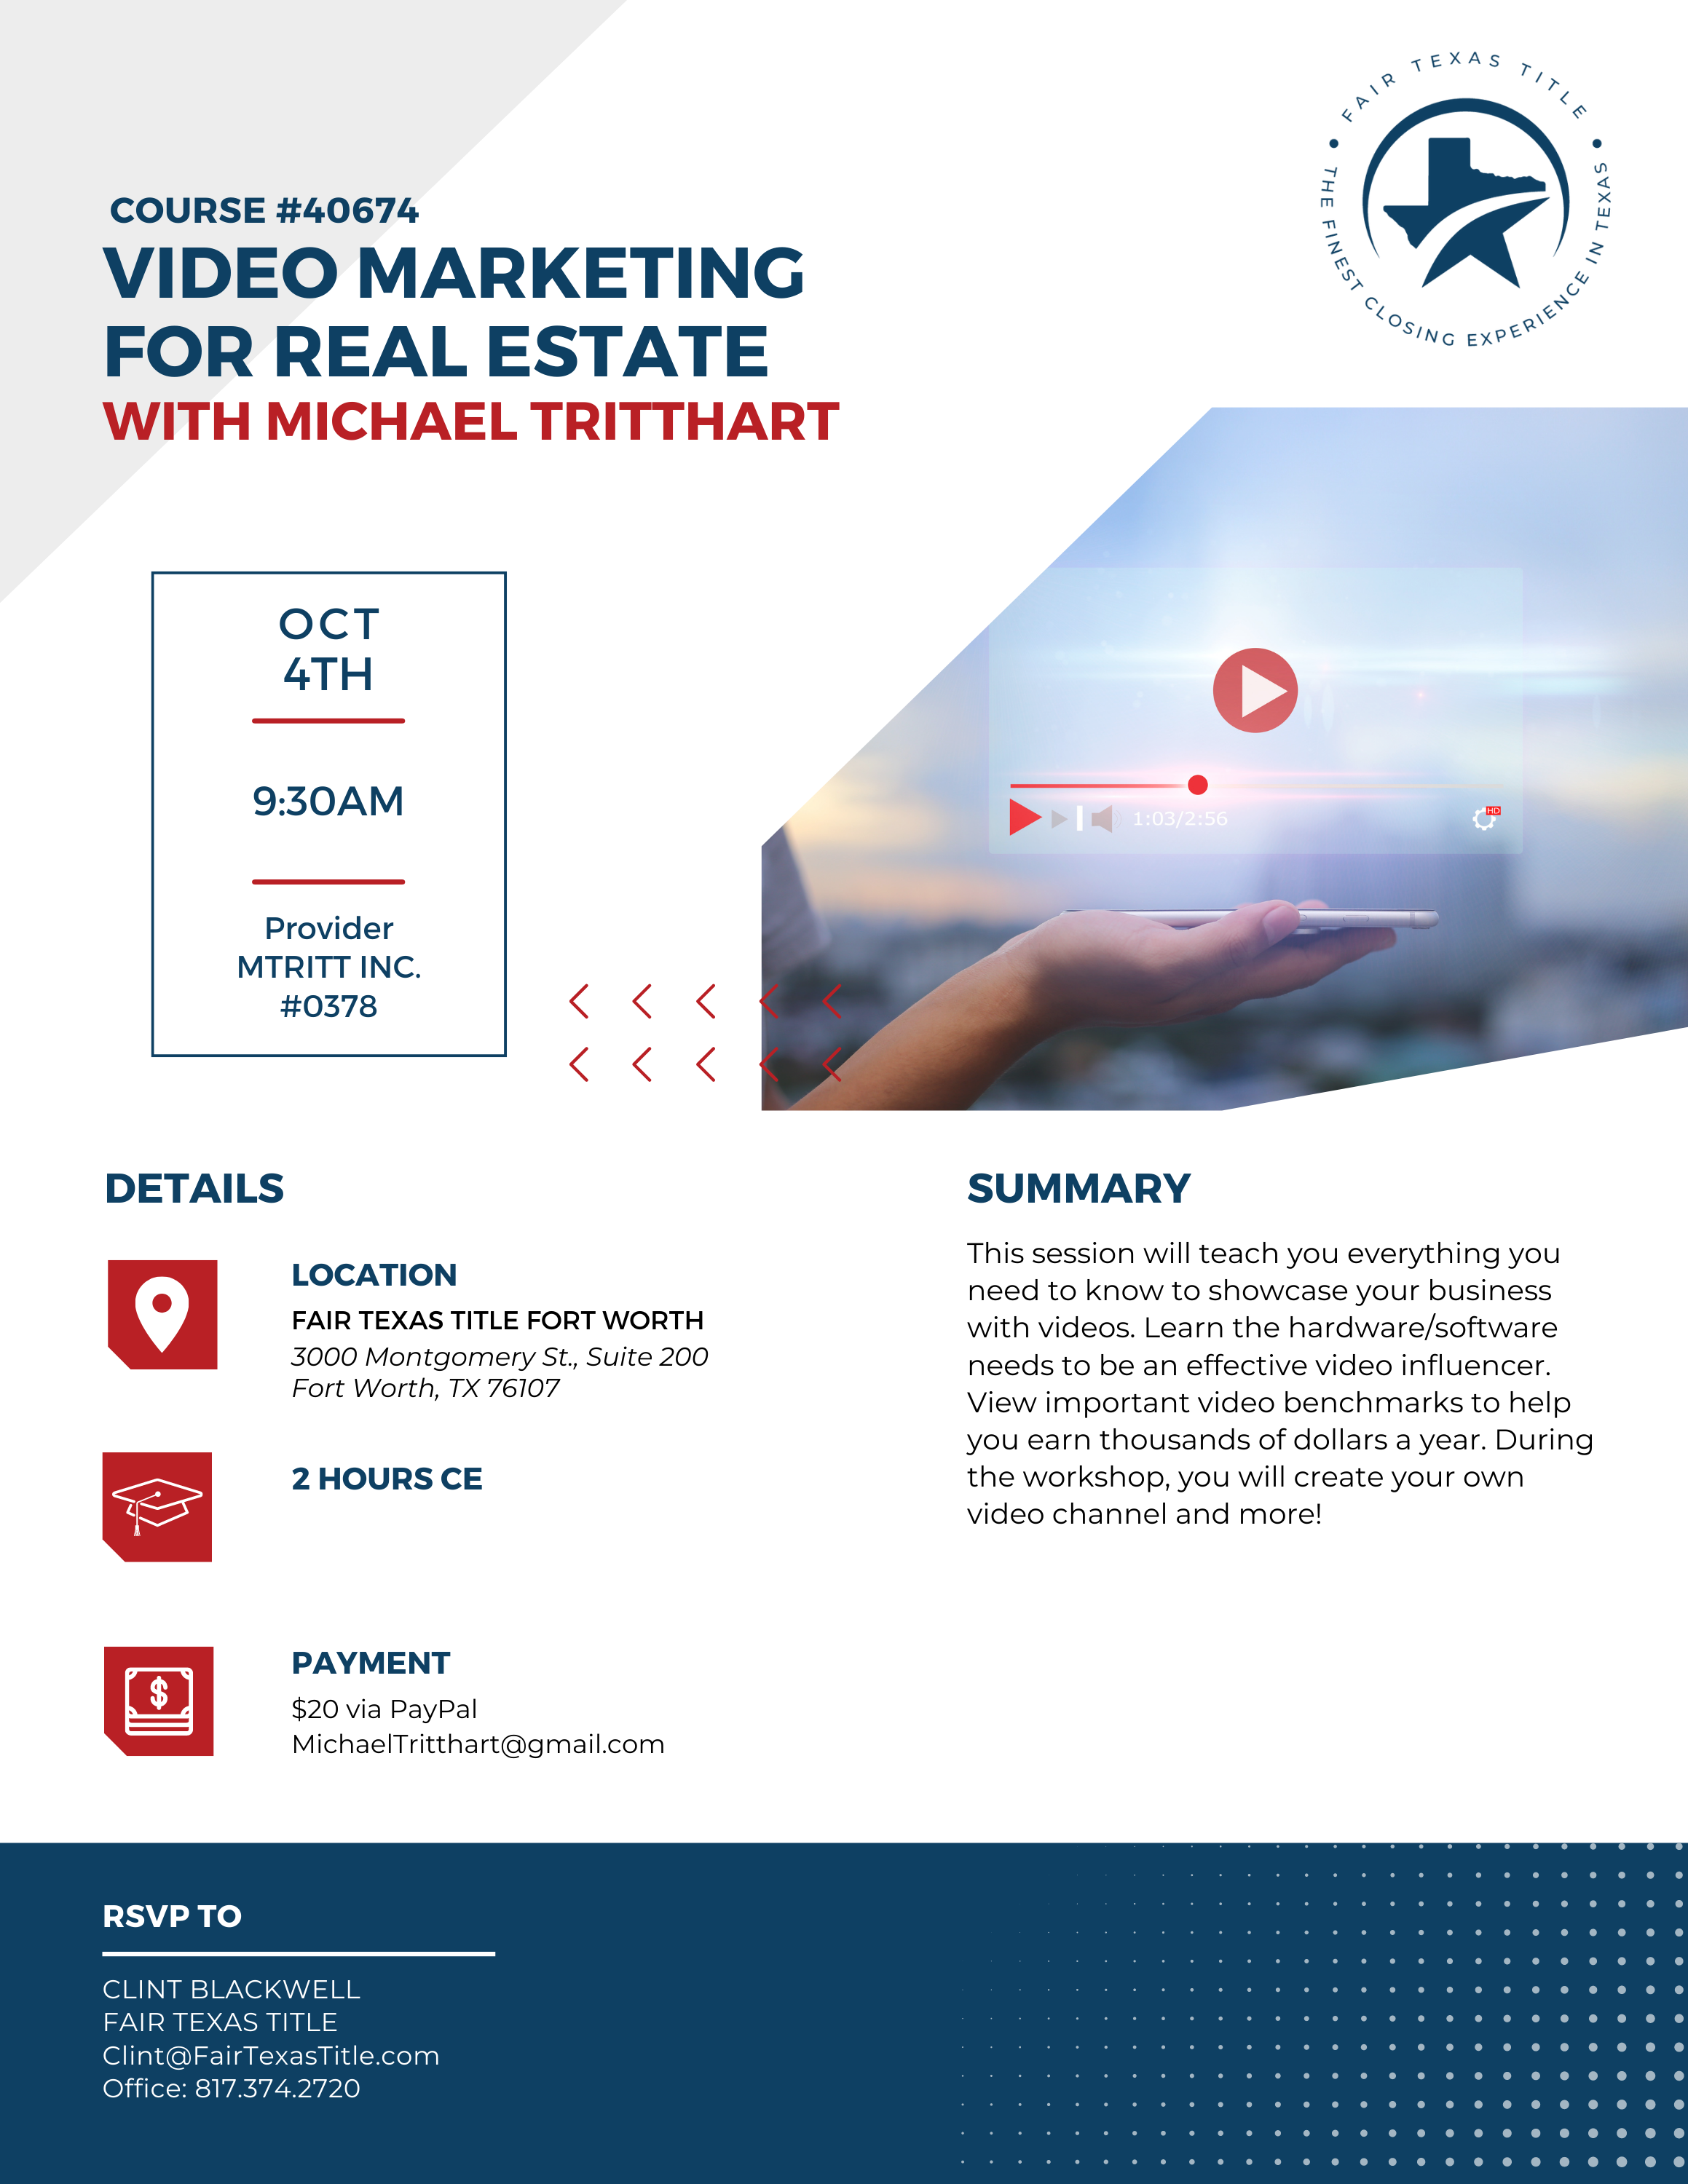 Video Marketing for Real Estate